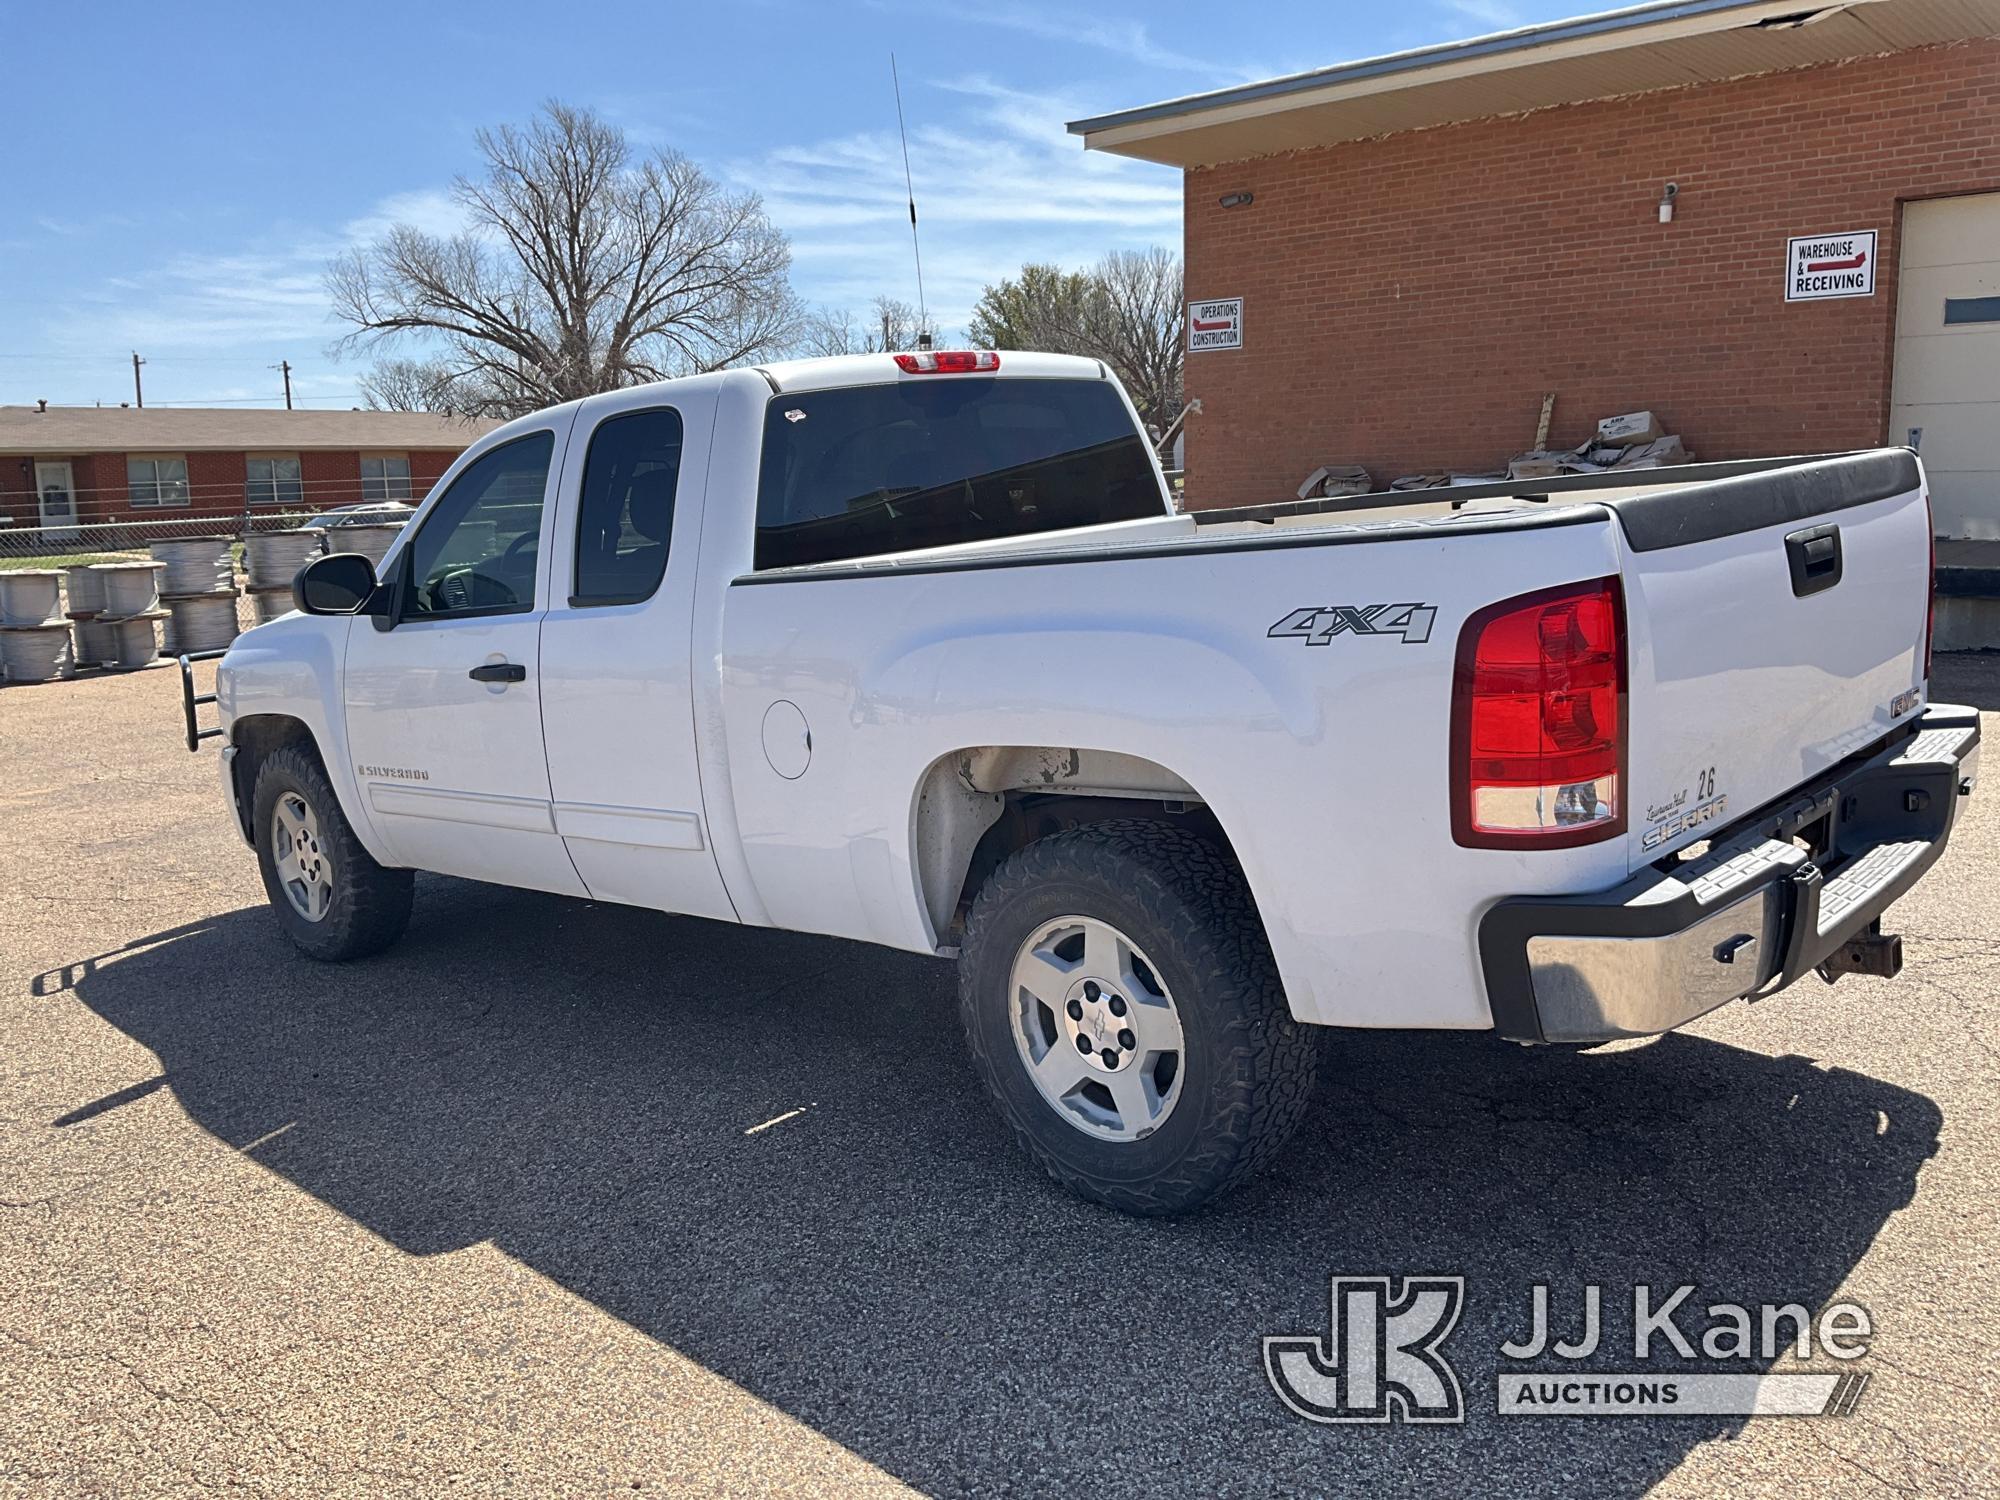 (Roby, TX) 2009 Chevrolet Silverado 1500 4x4 Extended-Cab Pickup Truck, Cooperative owned Runs and M